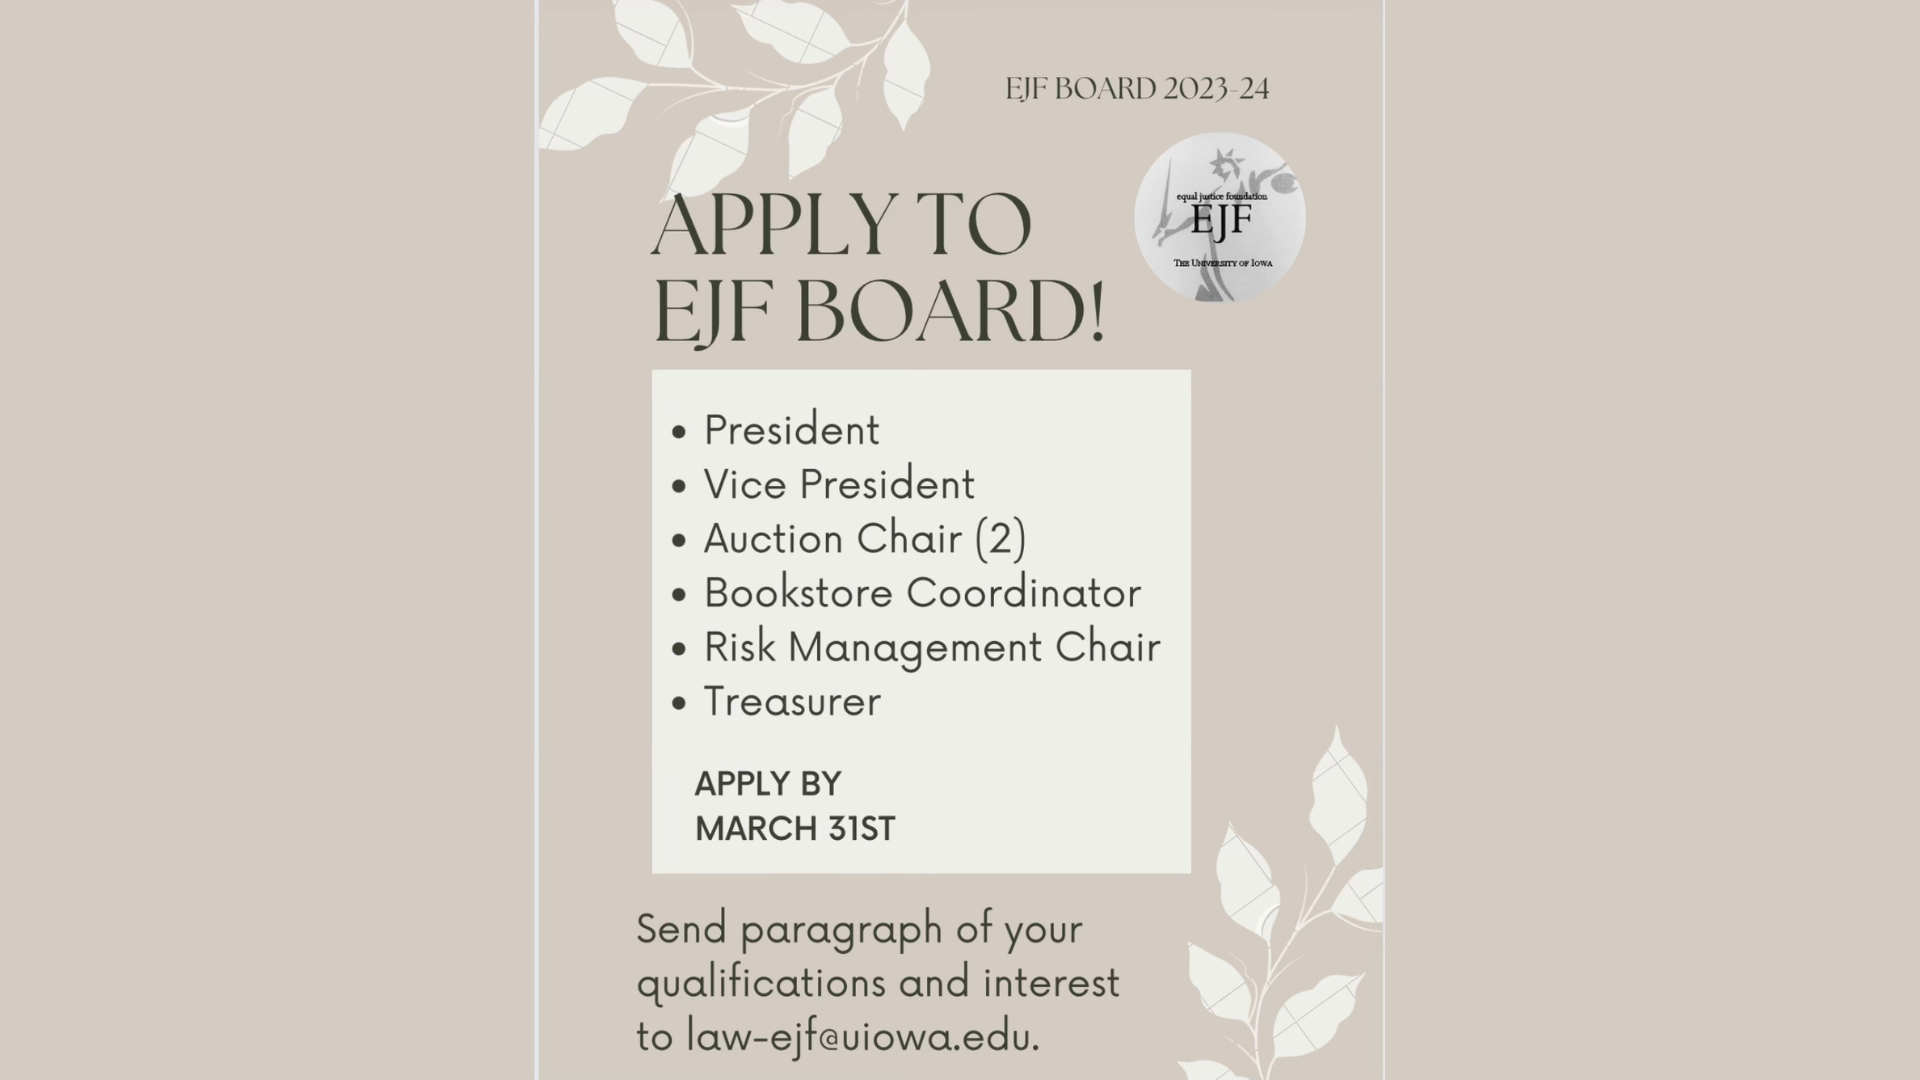  Apply to EJF Board!    -President    -Vice President    -Auction Chair (2)    -Bookstore Coordinator    -Risk Management Chair    -Treasurer        Apply by March 31st. Send paragraph of your qualifications and interest to law-ejf@uiowa.edu.